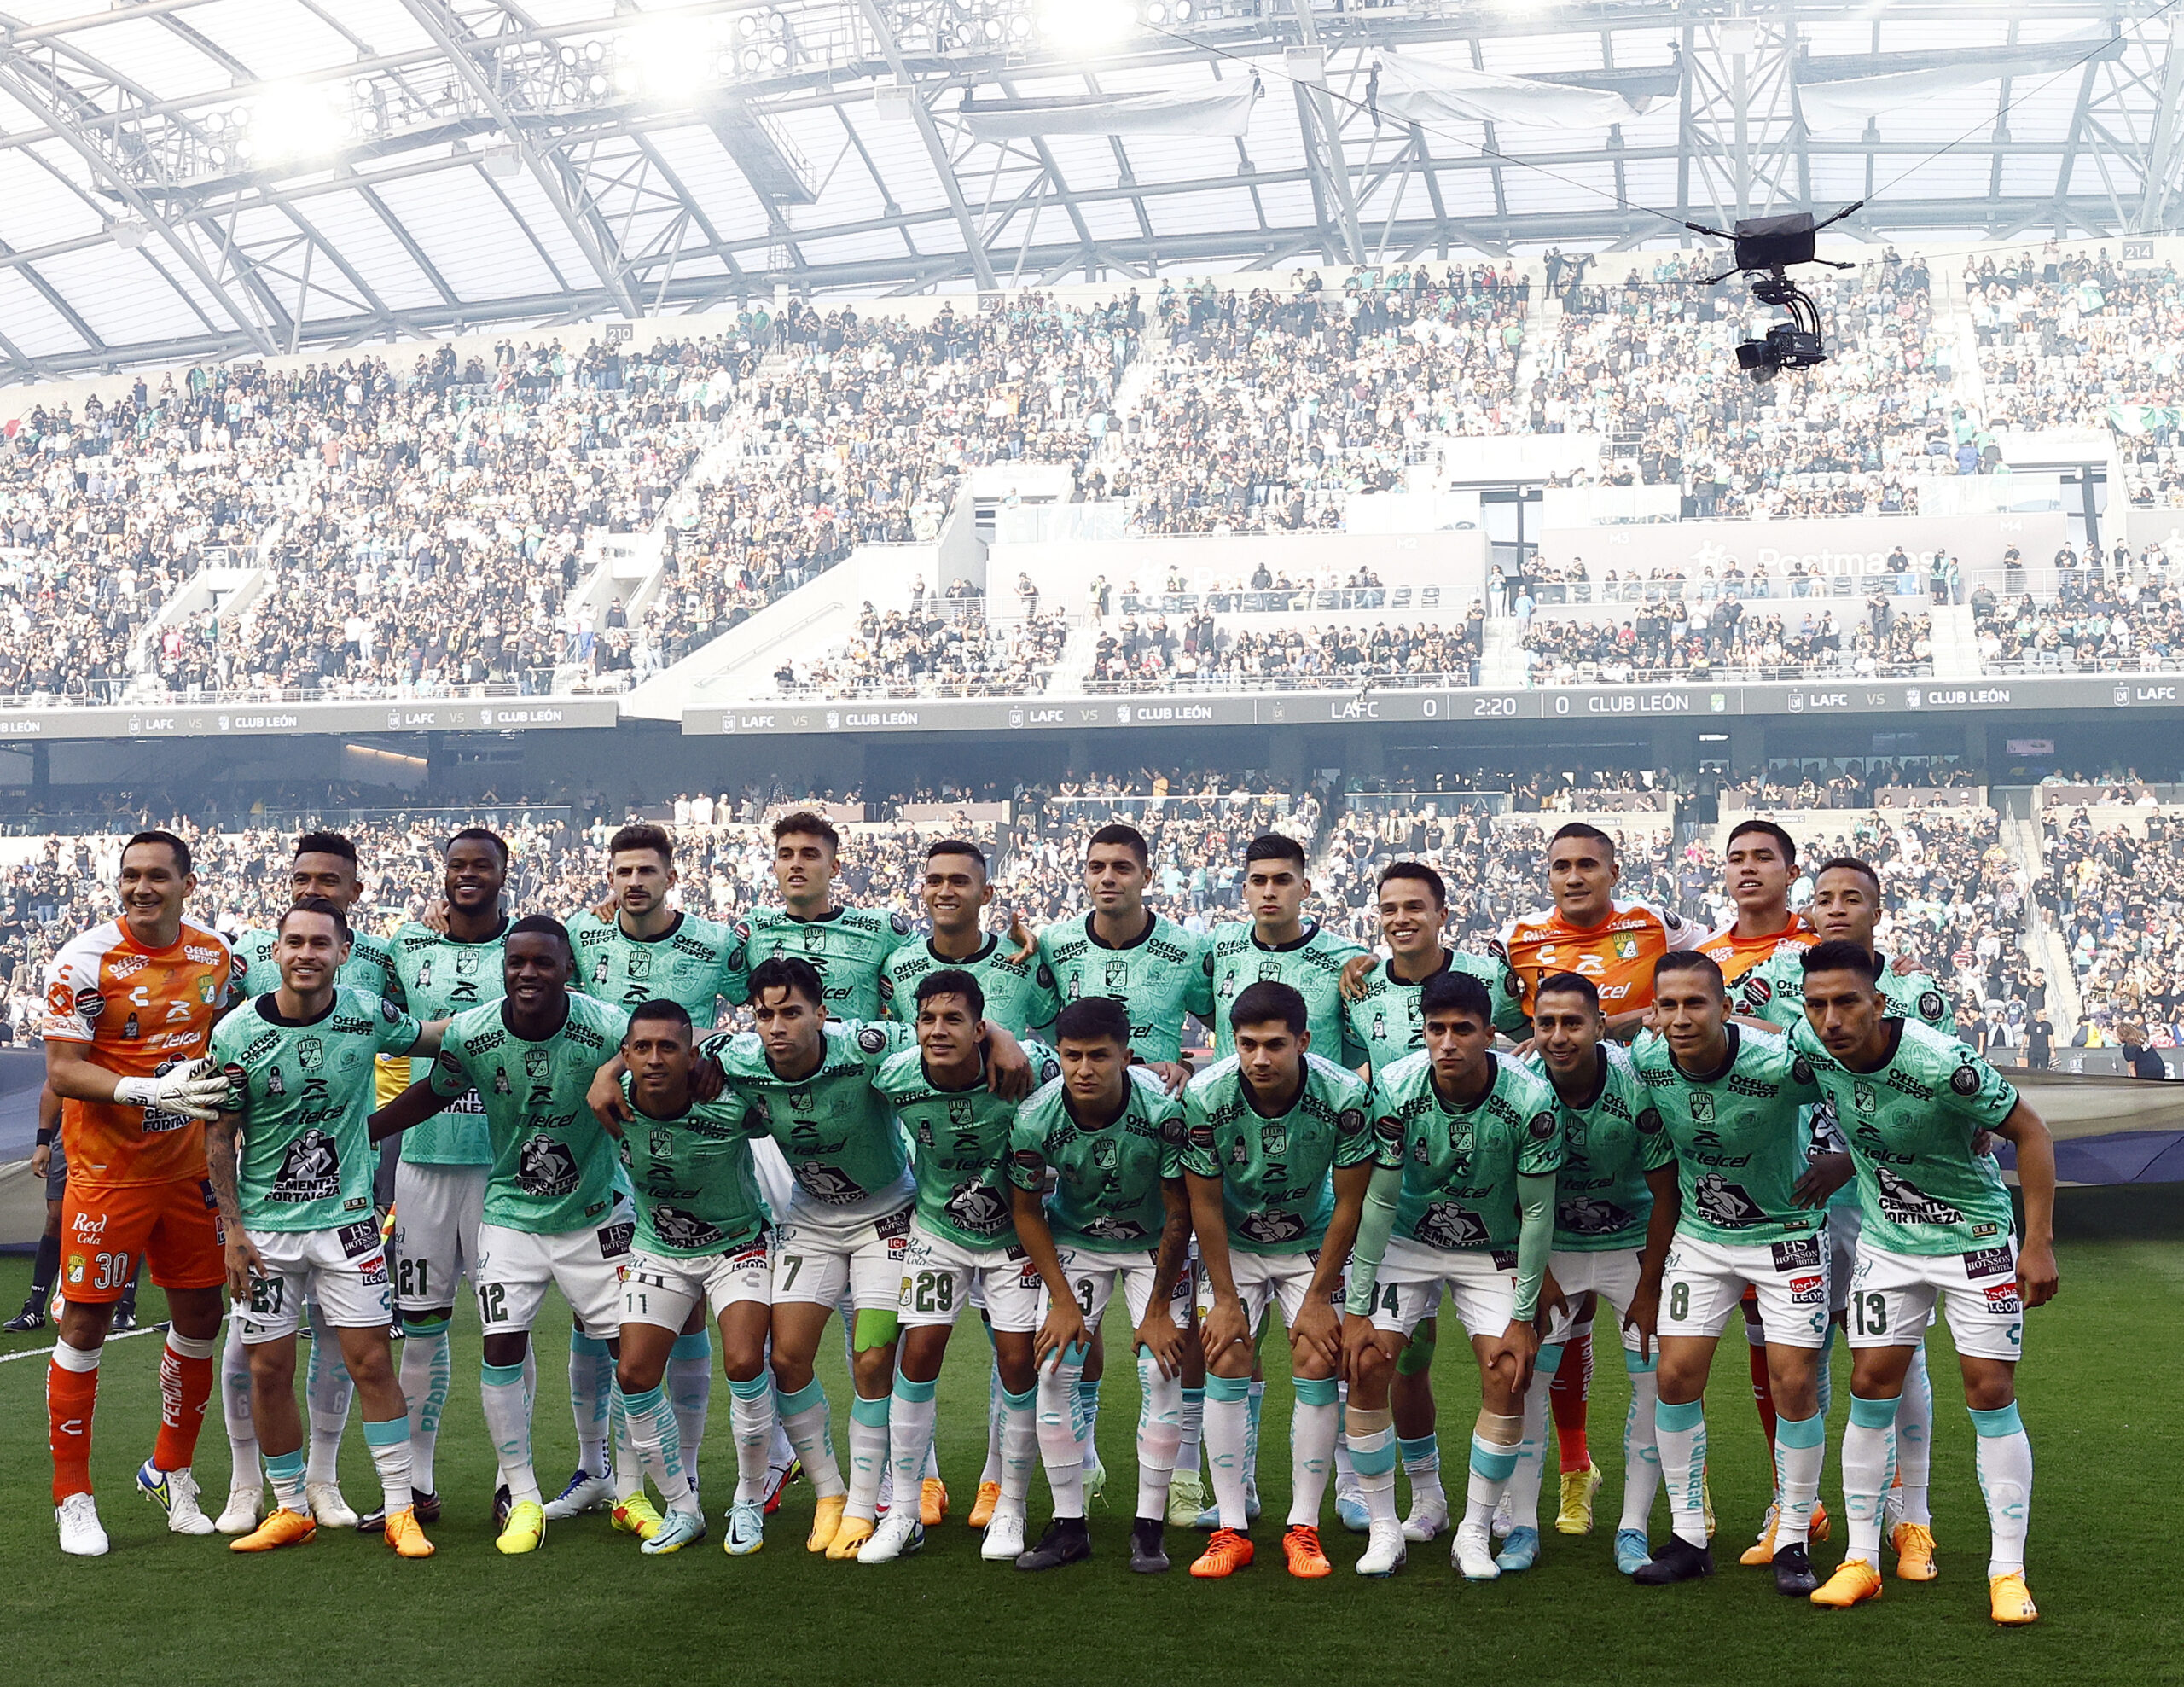 club-leon-de-mexico-was-stranded-at-the-vancouver-airport-one-day-before-the-game-against-la-galaxy-for-the-leagues-cup